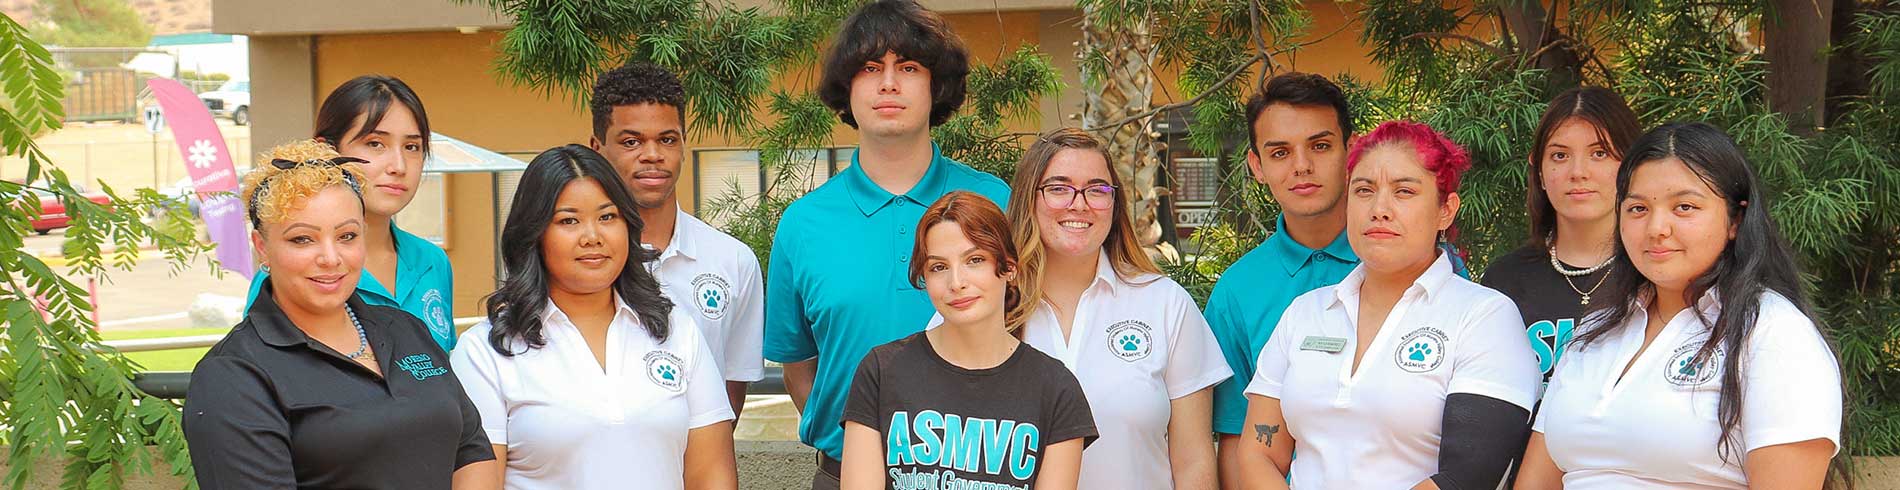 Banner Image featuring ASMVC students